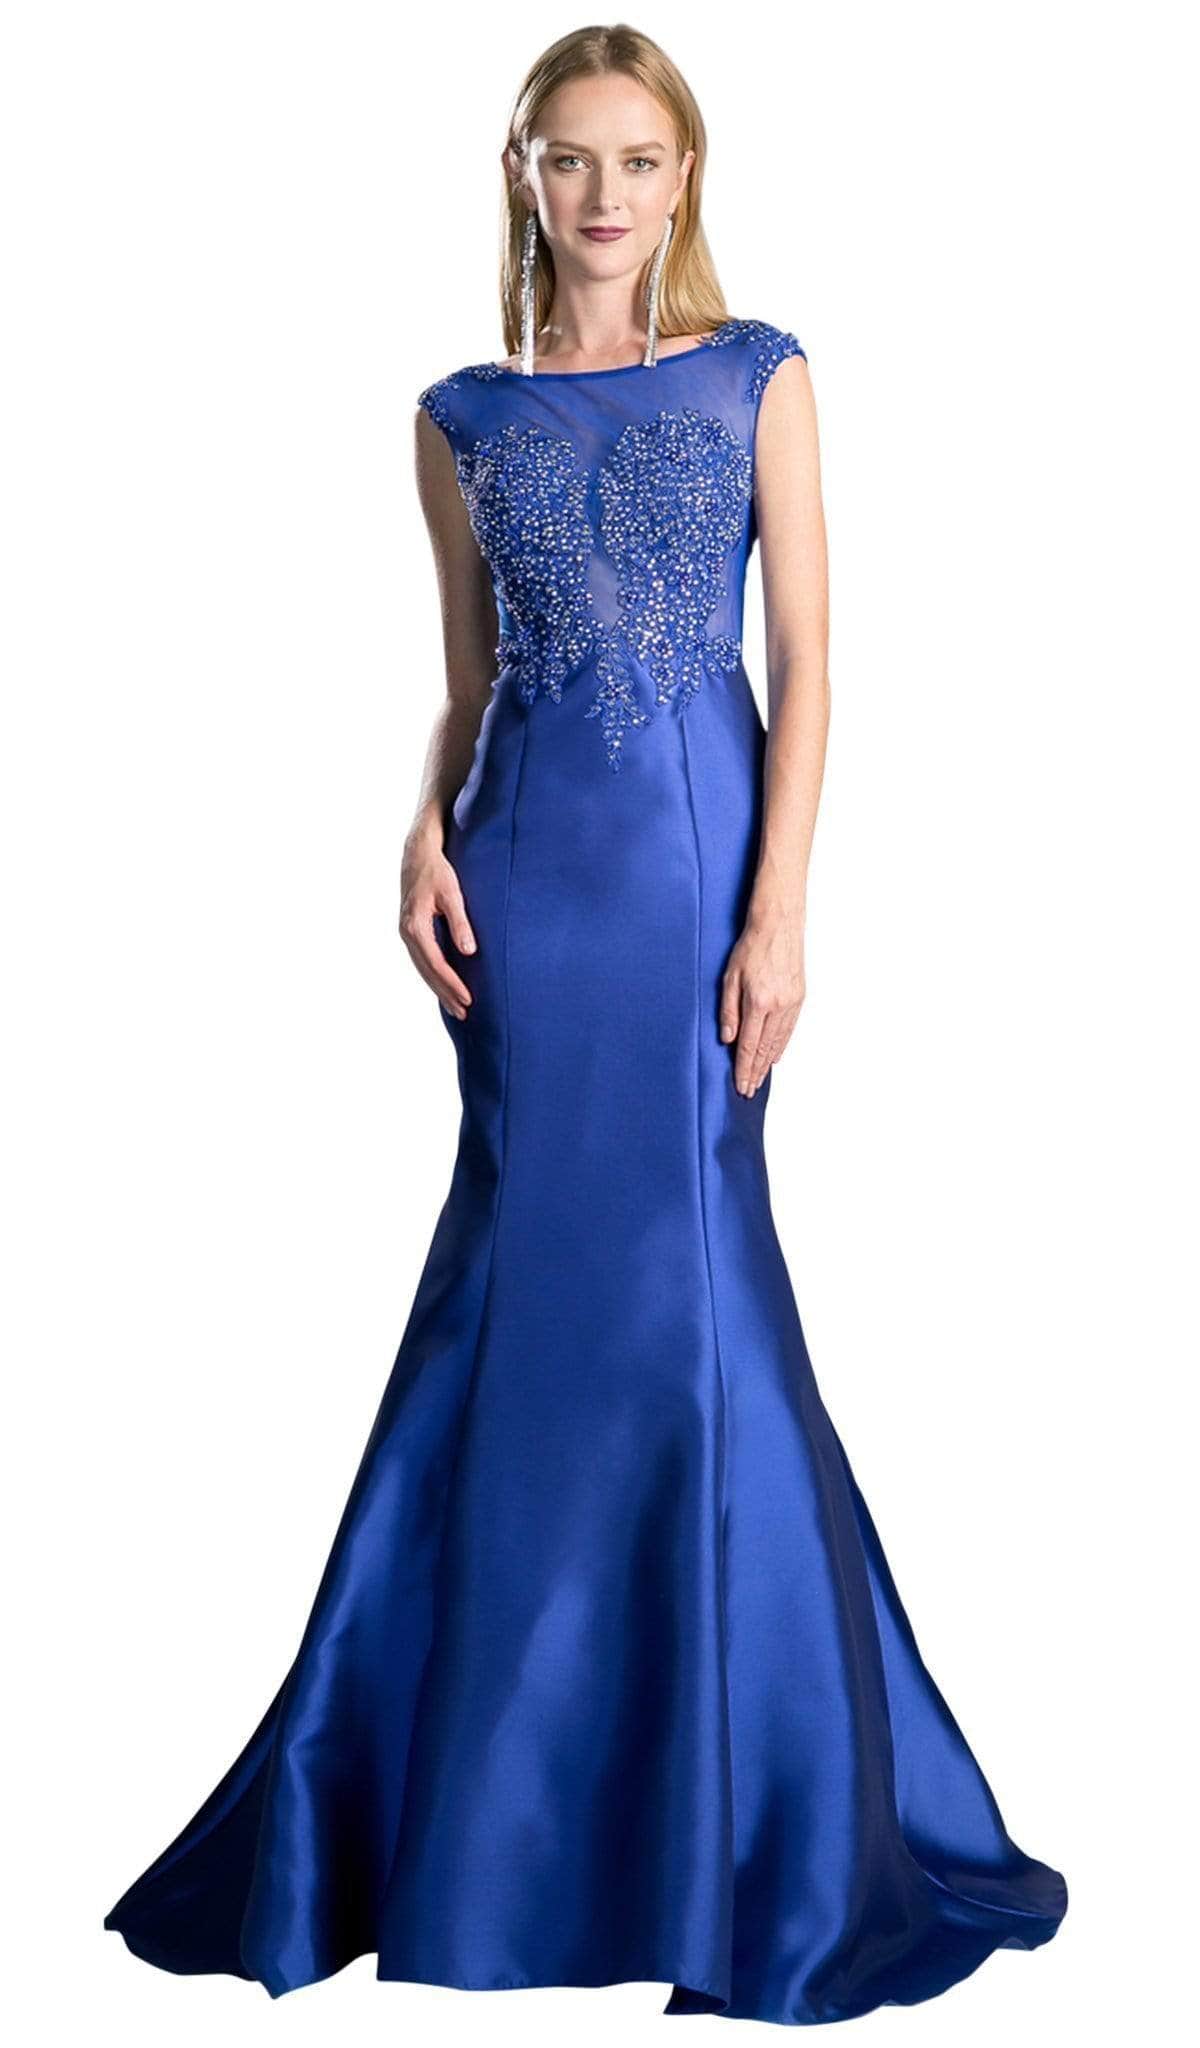 Ladivine 8984A Special Occasion Dress 2 / Royal